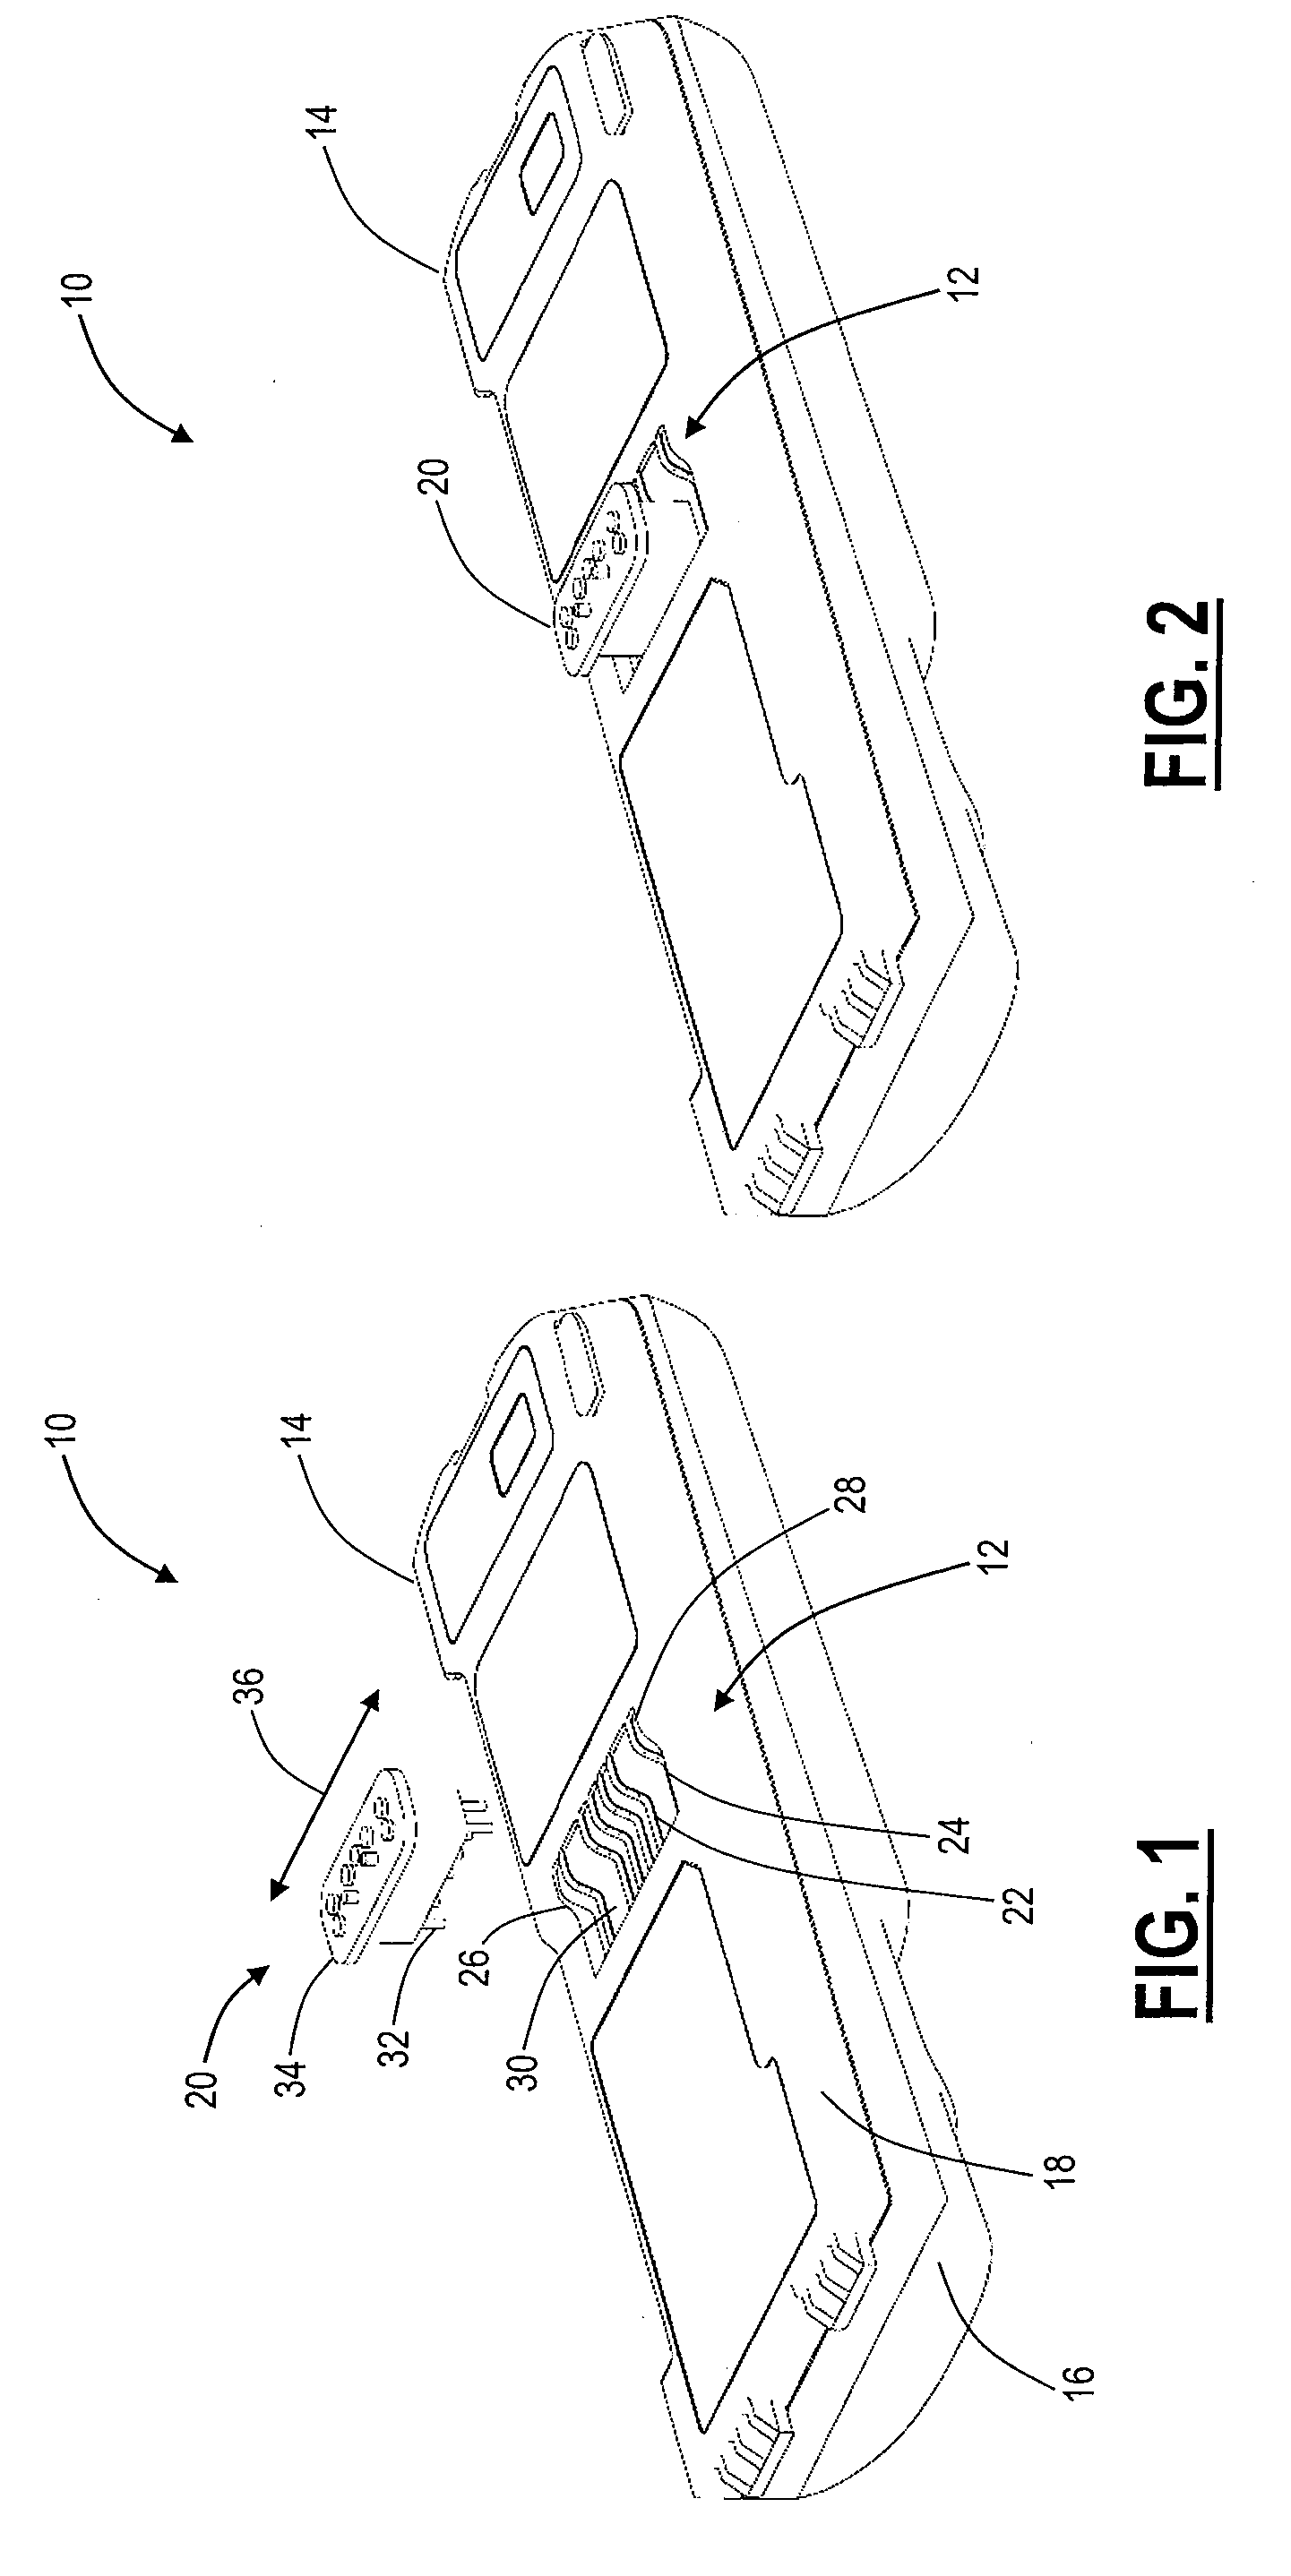 Ramped battery contact systems and methods